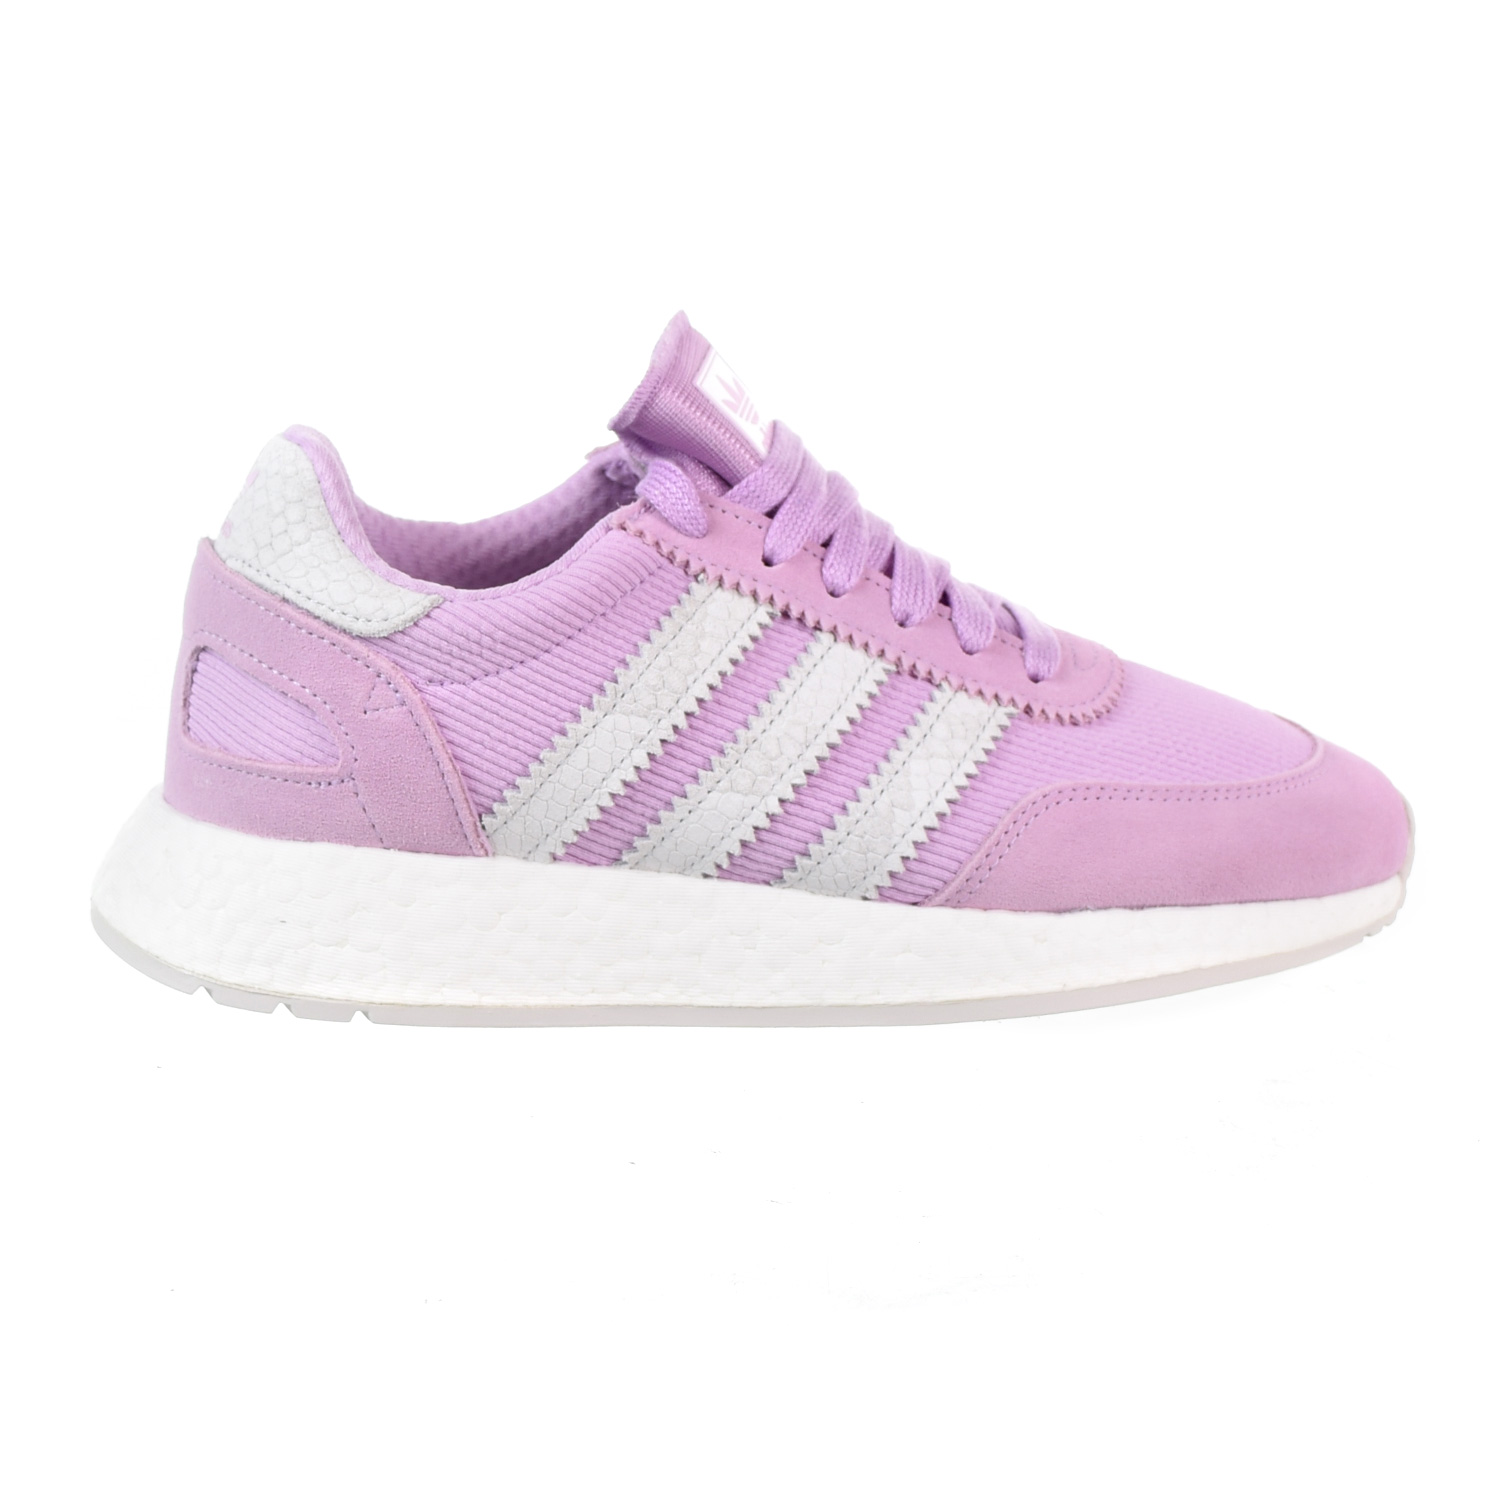 Adidas I-5923 Women's Shoes Clear Lilac 